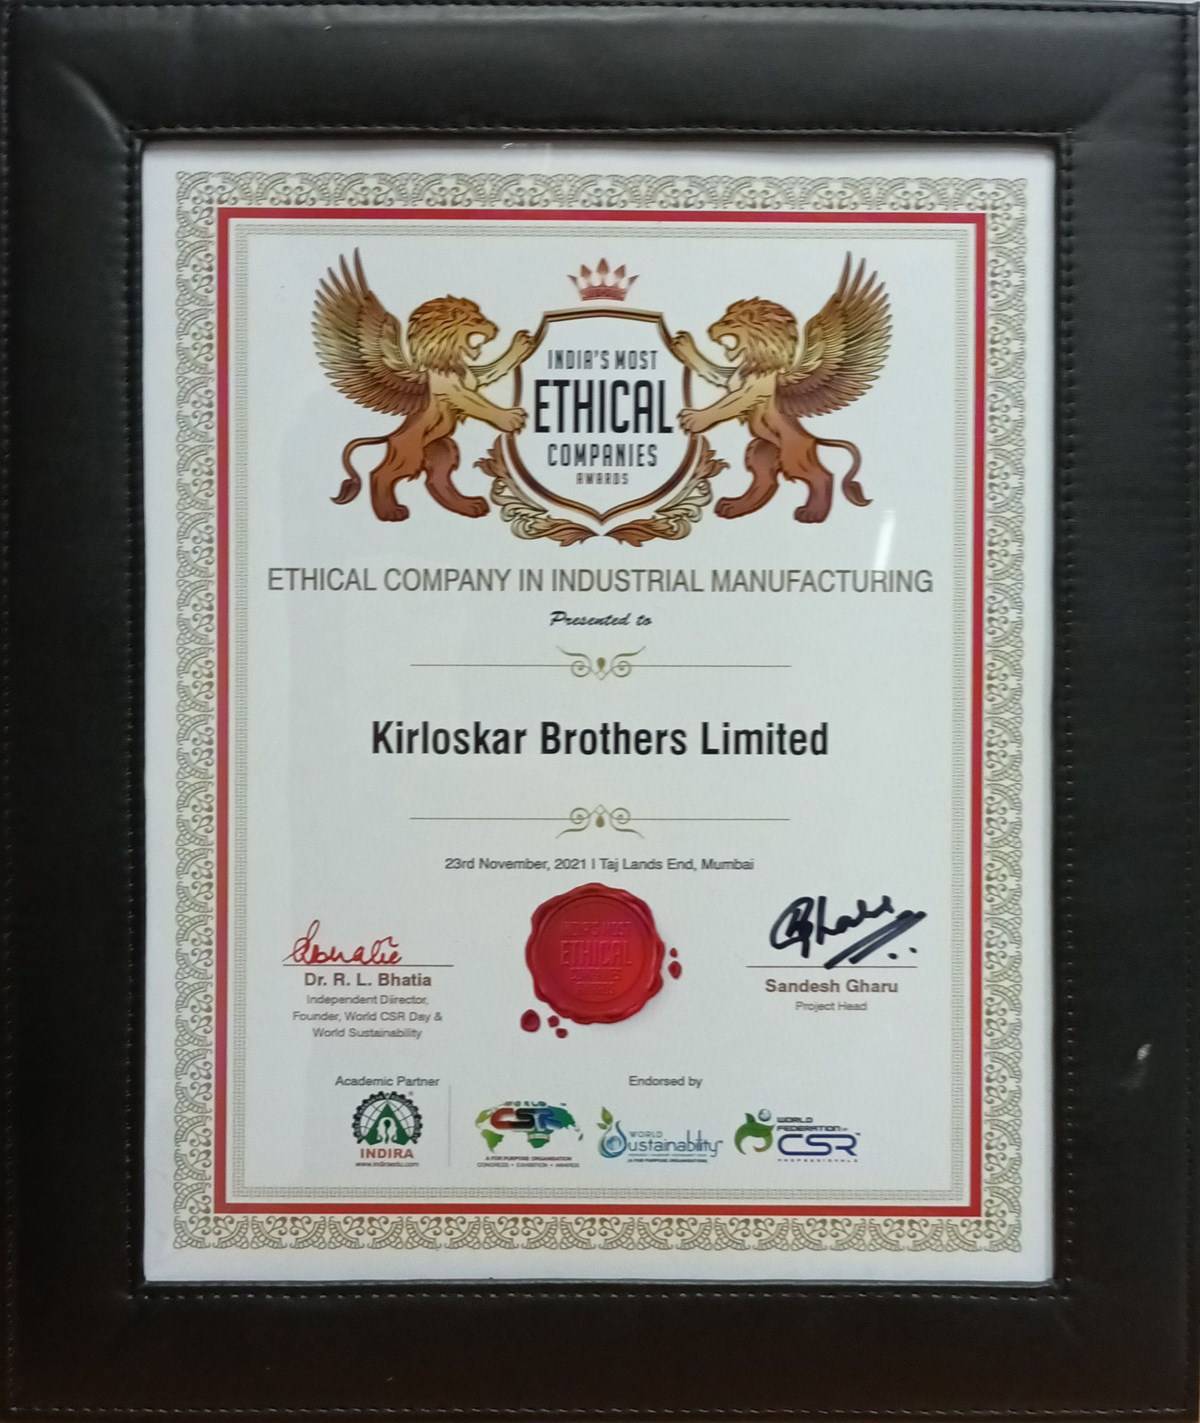 Kirloskar Brothers Limited Receives ‘India’s Most Ethical Company’ Award